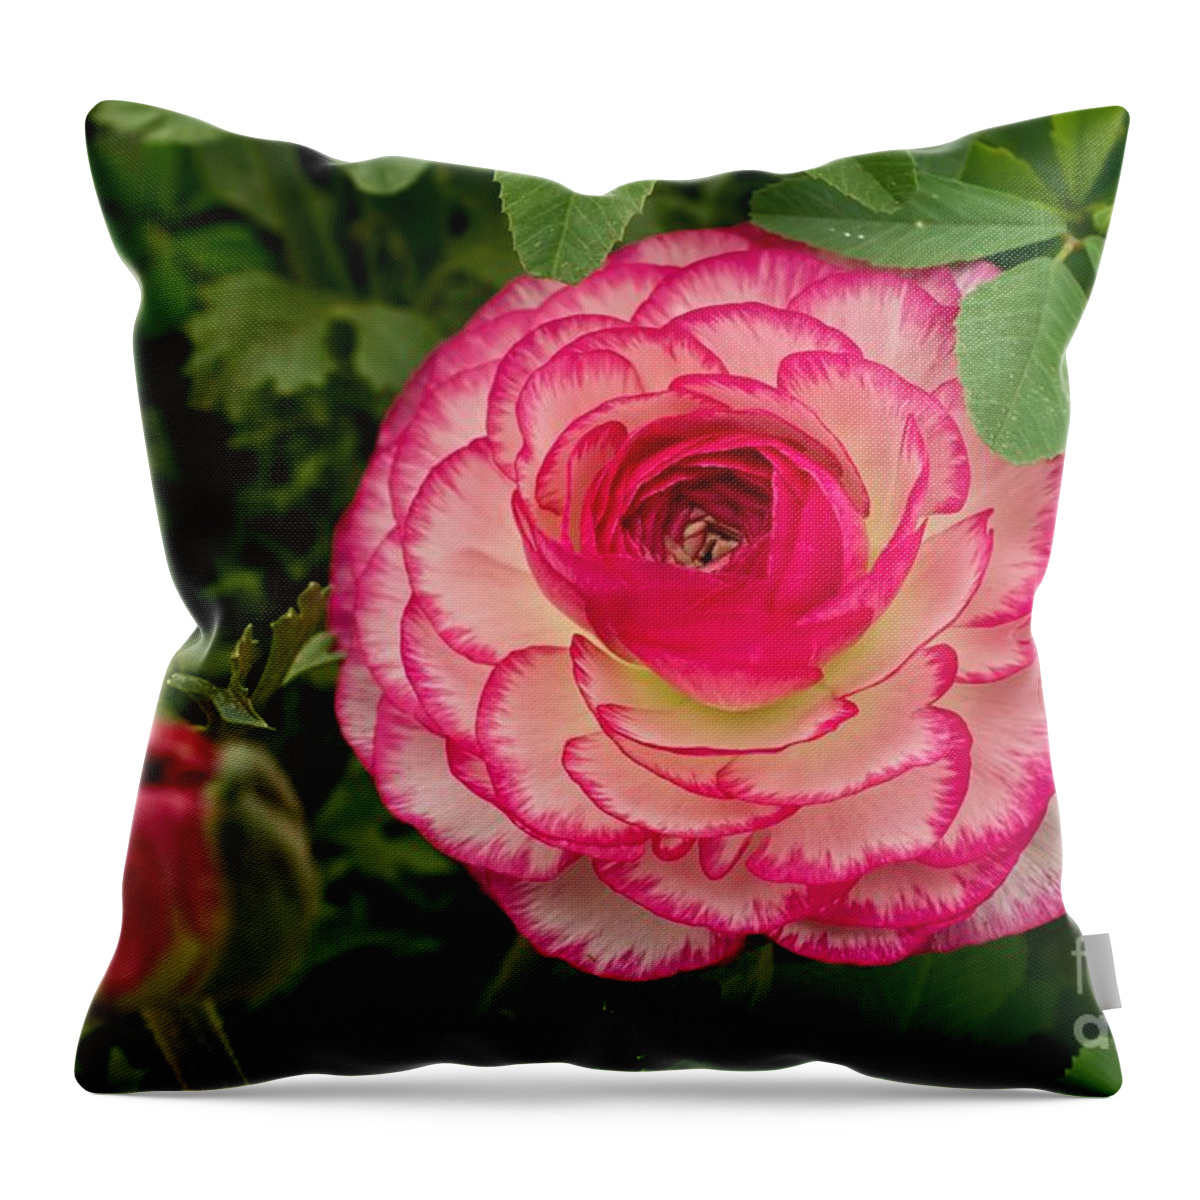 Pink Throw Pillow featuring the photograph Ruffles by Peggy Hughes